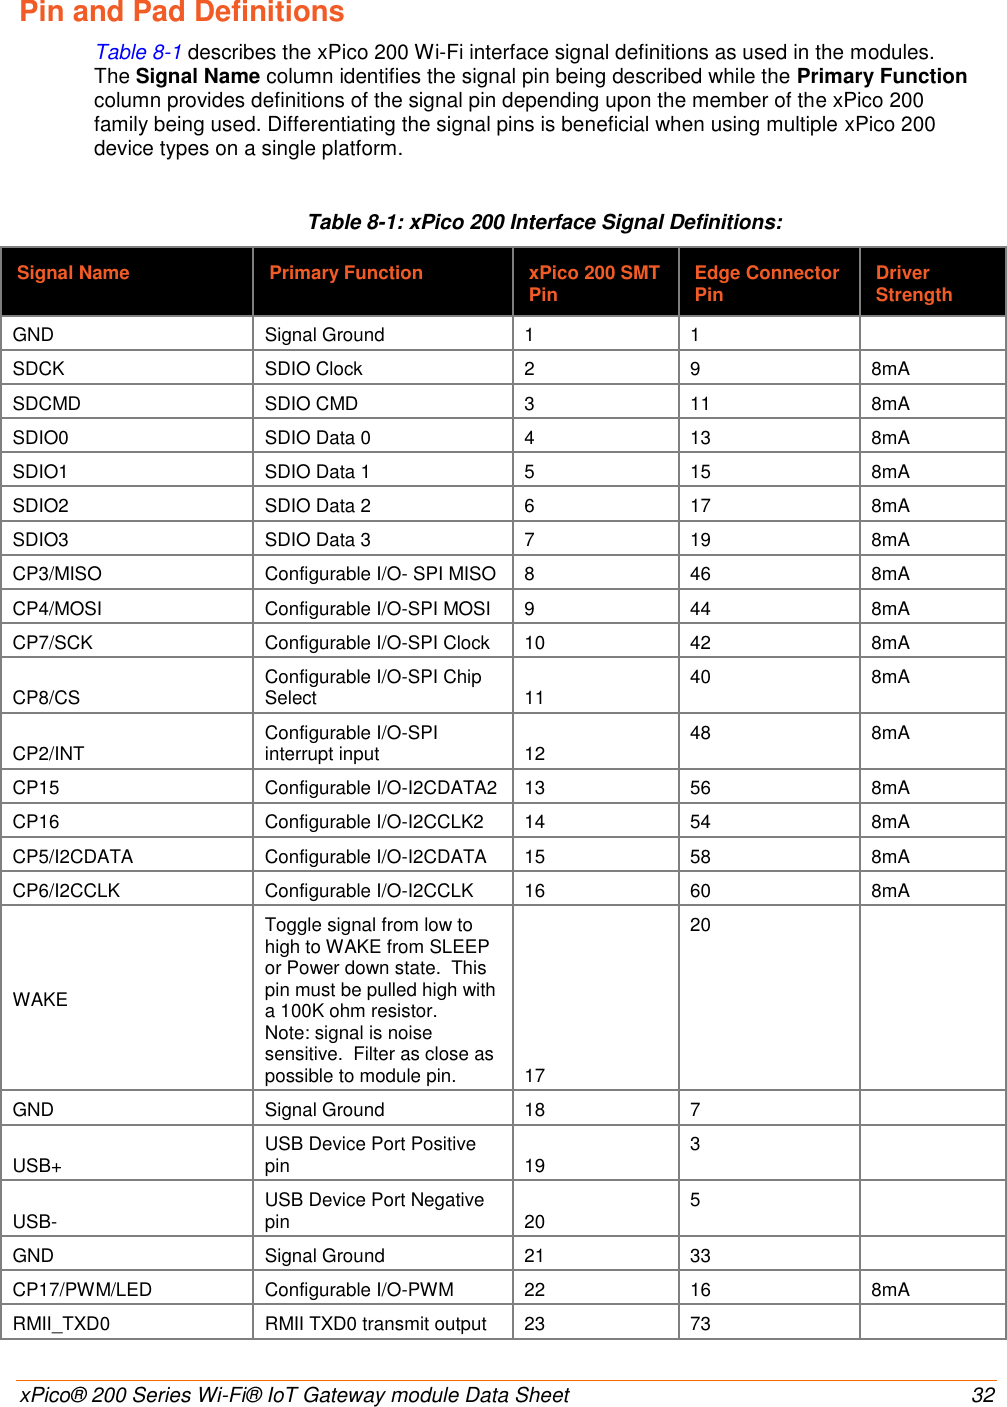    xPico® 200 Series Wi-Fi® IoT Gateway module Data Sheet  32 Pin and Pad Definitions Table 8-1 describes the xPico 200 Wi-Fi interface signal definitions as used in the modules. The Signal Name column identifies the signal pin being described while the Primary Function column provides definitions of the signal pin depending upon the member of the xPico 200 family being used. Differentiating the signal pins is beneficial when using multiple xPico 200 device types on a single platform. Table 8-1: xPico 200 Interface Signal Definitions: Signal Name Primary Function xPico 200 SMT Pin Edge Connector Pin Driver Strength GND Signal Ground 1 1  SDCK SDIO Clock 2 9 8mA SDCMD SDIO CMD 3 11 8mA SDIO0 SDIO Data 0 4 13 8mA SDIO1 SDIO Data 1 5 15 8mA SDIO2 SDIO Data 2 6 17 8mA SDIO3 SDIO Data 3 7 19 8mA CP3/MISO Configurable I/O- SPI MISO 8 46 8mA CP4/MOSI Configurable I/O-SPI MOSI 9 44 8mA CP7/SCK Configurable I/O-SPI Clock 10 42 8mA CP8/CS Configurable I/O-SPI Chip Select 11 40 8mA CP2/INT Configurable I/O-SPI interrupt input 12 48 8mA CP15 Configurable I/O-I2CDATA2 13 56 8mA CP16 Configurable I/O-I2CCLK2 14 54 8mA CP5/I2CDATA Configurable I/O-I2CDATA 15 58 8mA CP6/I2CCLK Configurable I/O-I2CCLK 16 60 8mA WAKE Toggle signal from low to high to WAKE from SLEEP or Power down state.  This pin must be pulled high with a 100K ohm resistor. Note: signal is noise sensitive.  Filter as close as possible to module pin. 17 20  GND Signal Ground 18 7  USB+ USB Device Port Positive pin 19 3  USB- USB Device Port Negative pin 20 5  GND Signal Ground 21 33  CP17/PWM/LED Configurable I/O-PWM 22 16 8mA RMII_TXD0 RMII TXD0 transmit output 23 73  